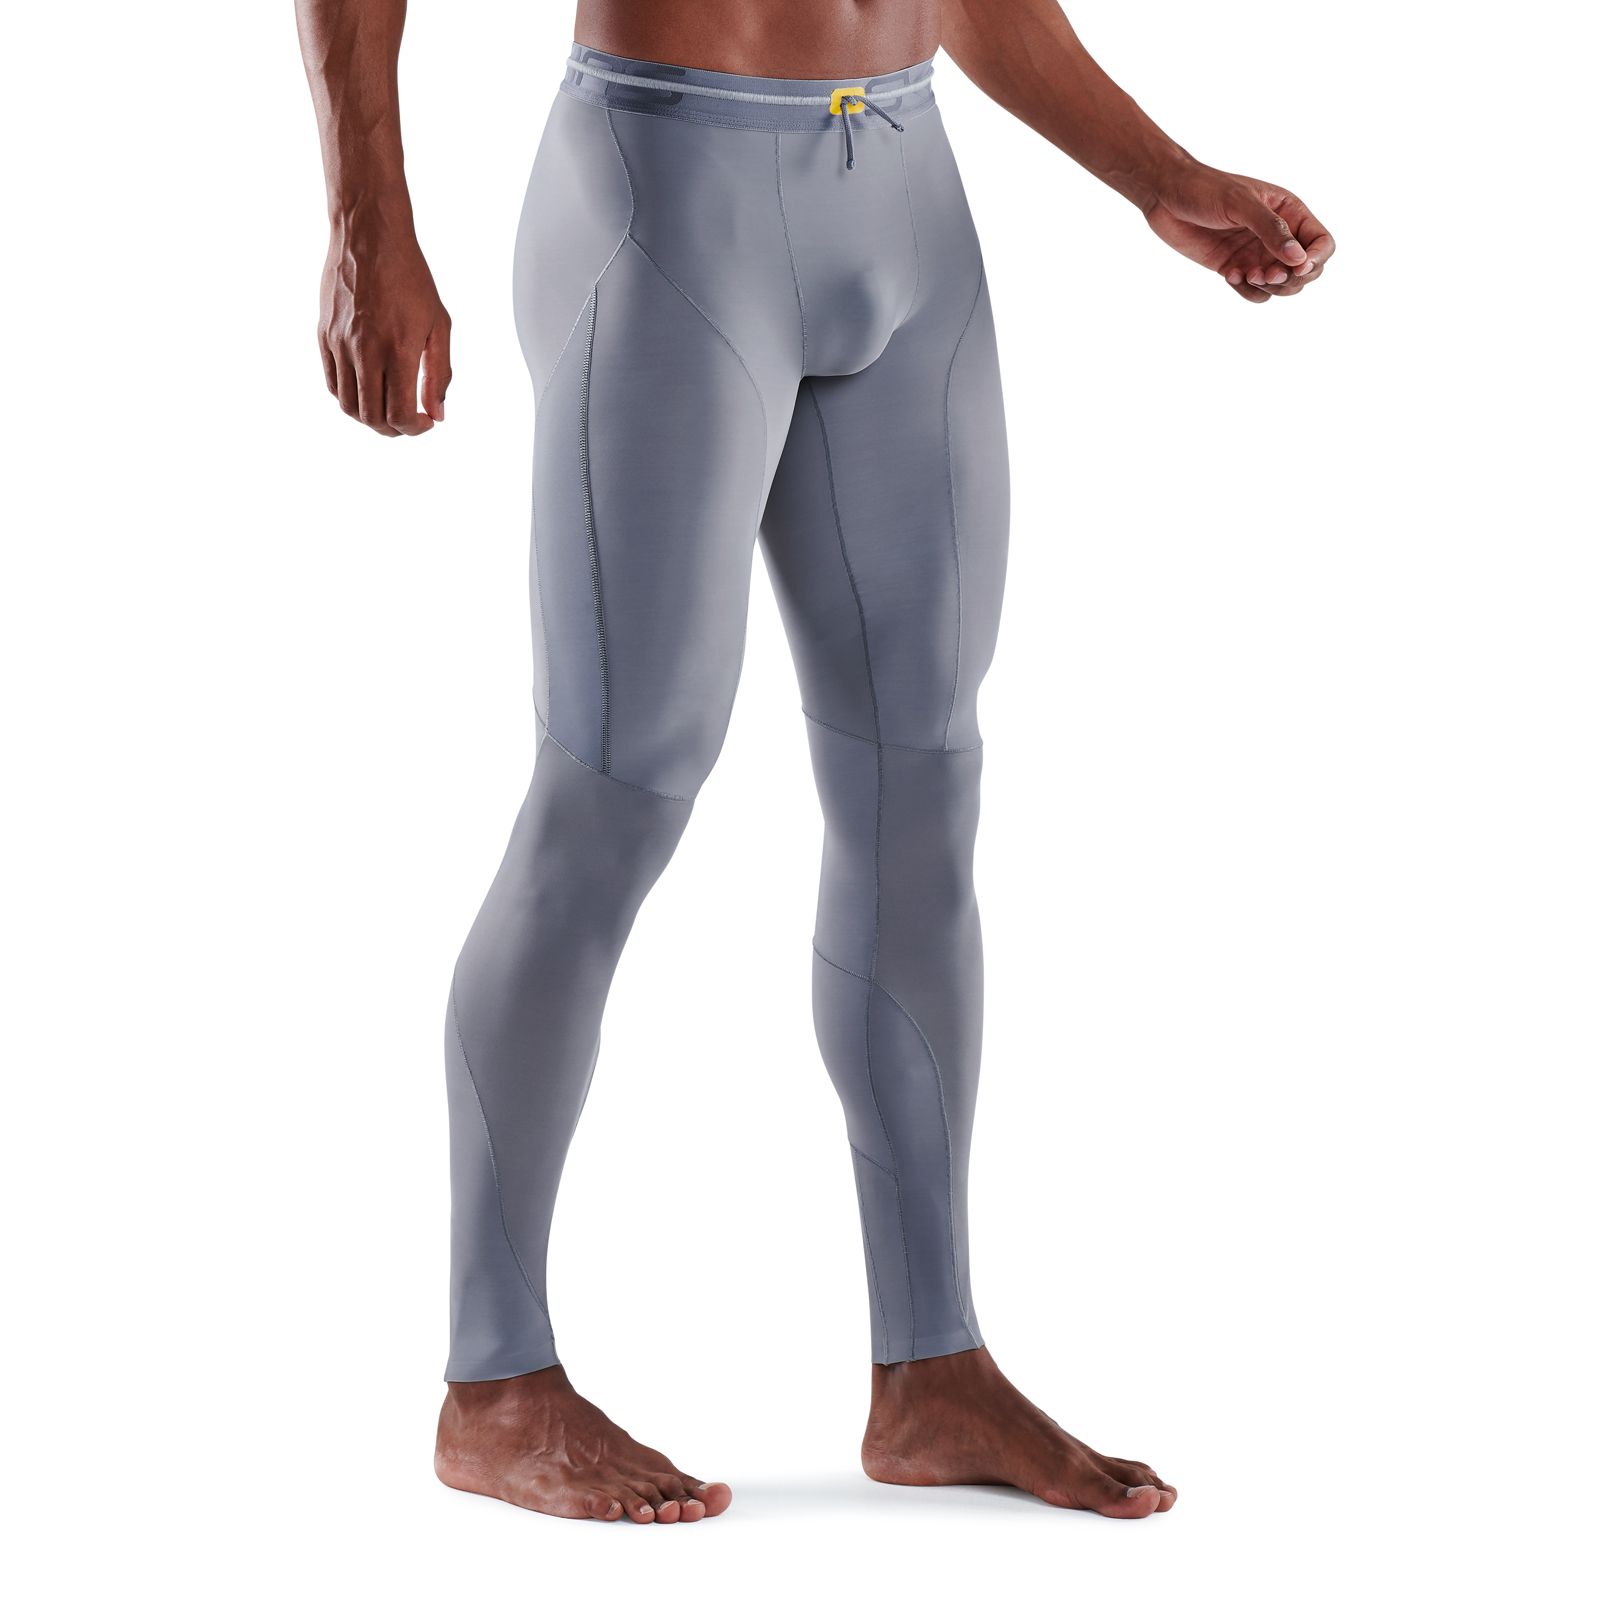 Skins RY 400 Compression Tight